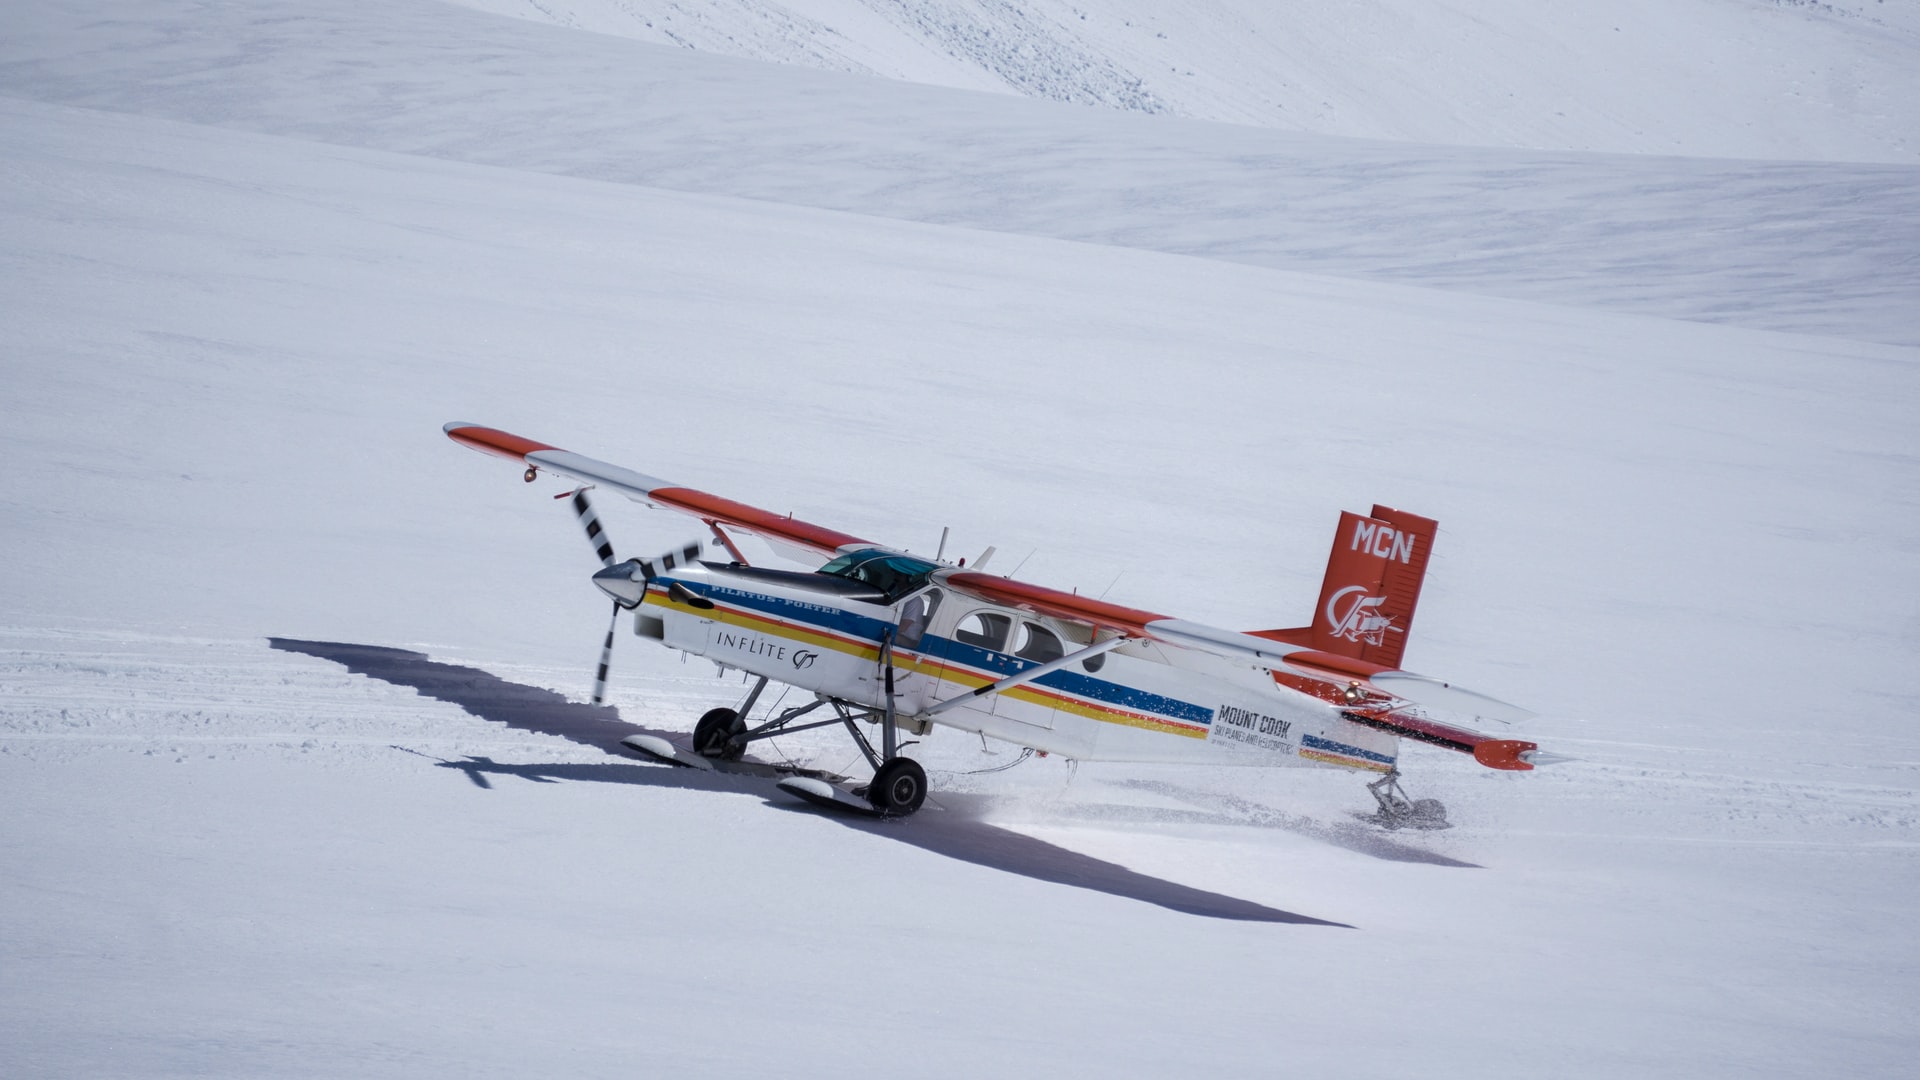 A small airplane landed in snow after completing a flight to Antarctica.